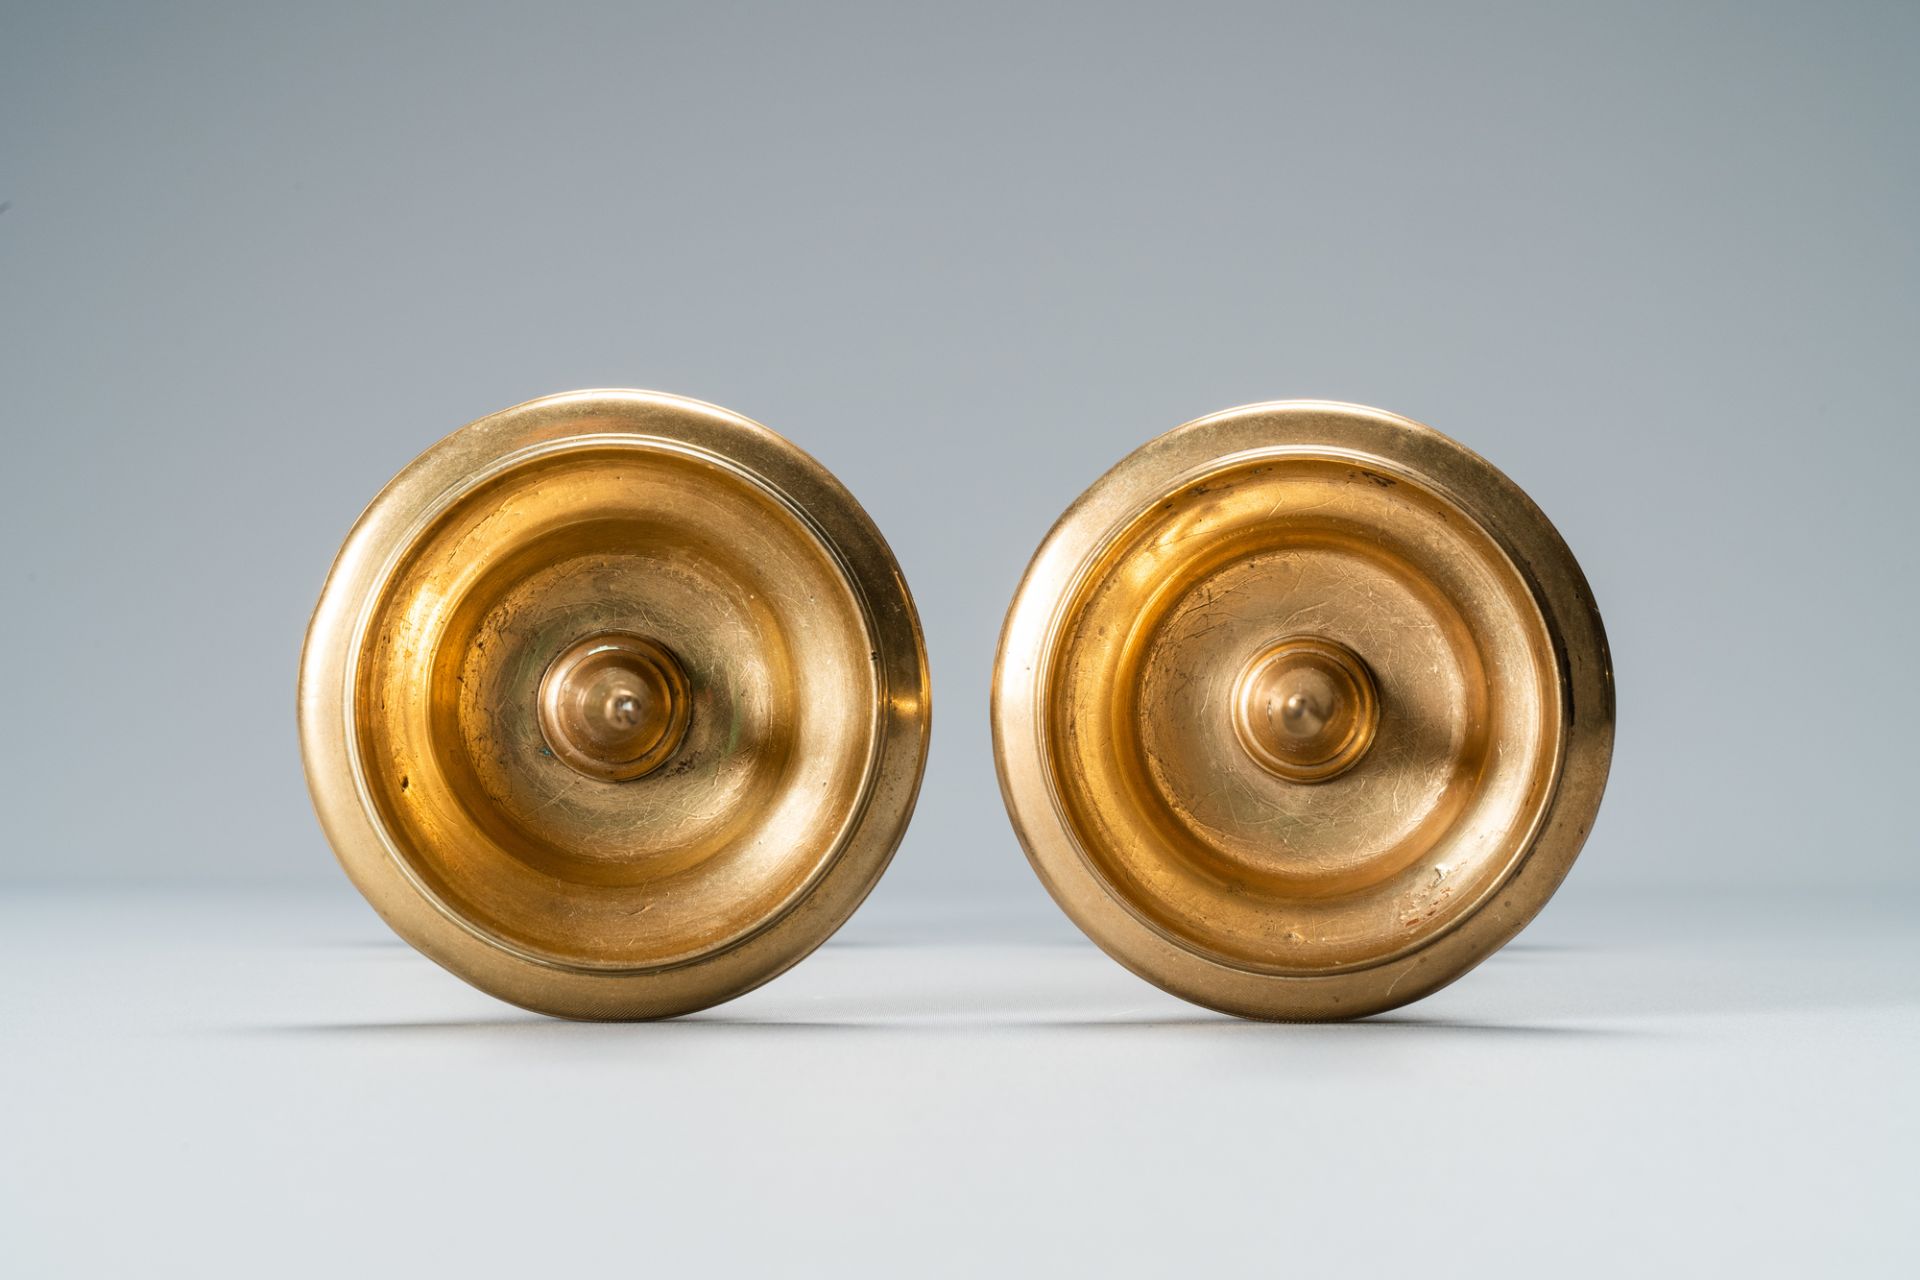 A pair of brass alloy candlesticks, Italy, 17th C. - Image 6 of 7